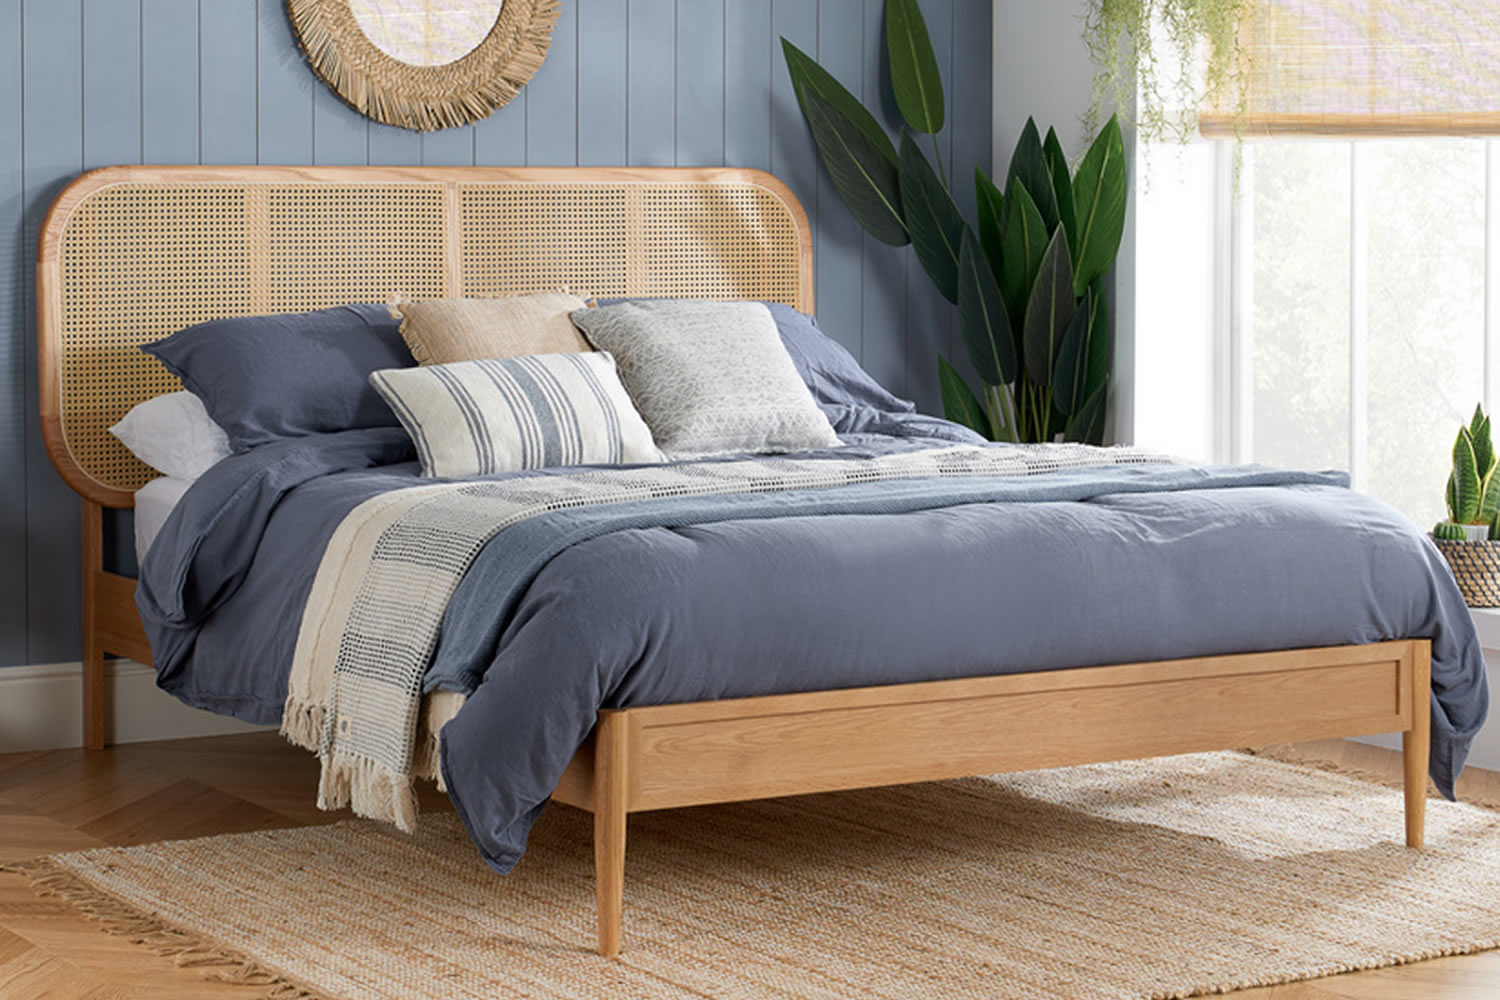 View Elina Wooden Rattan 46 Double Size Bed Frame Crafted From Solid Oak Curved Headboard Low Foot End Sturdy Legs Sprung Slatted Base information